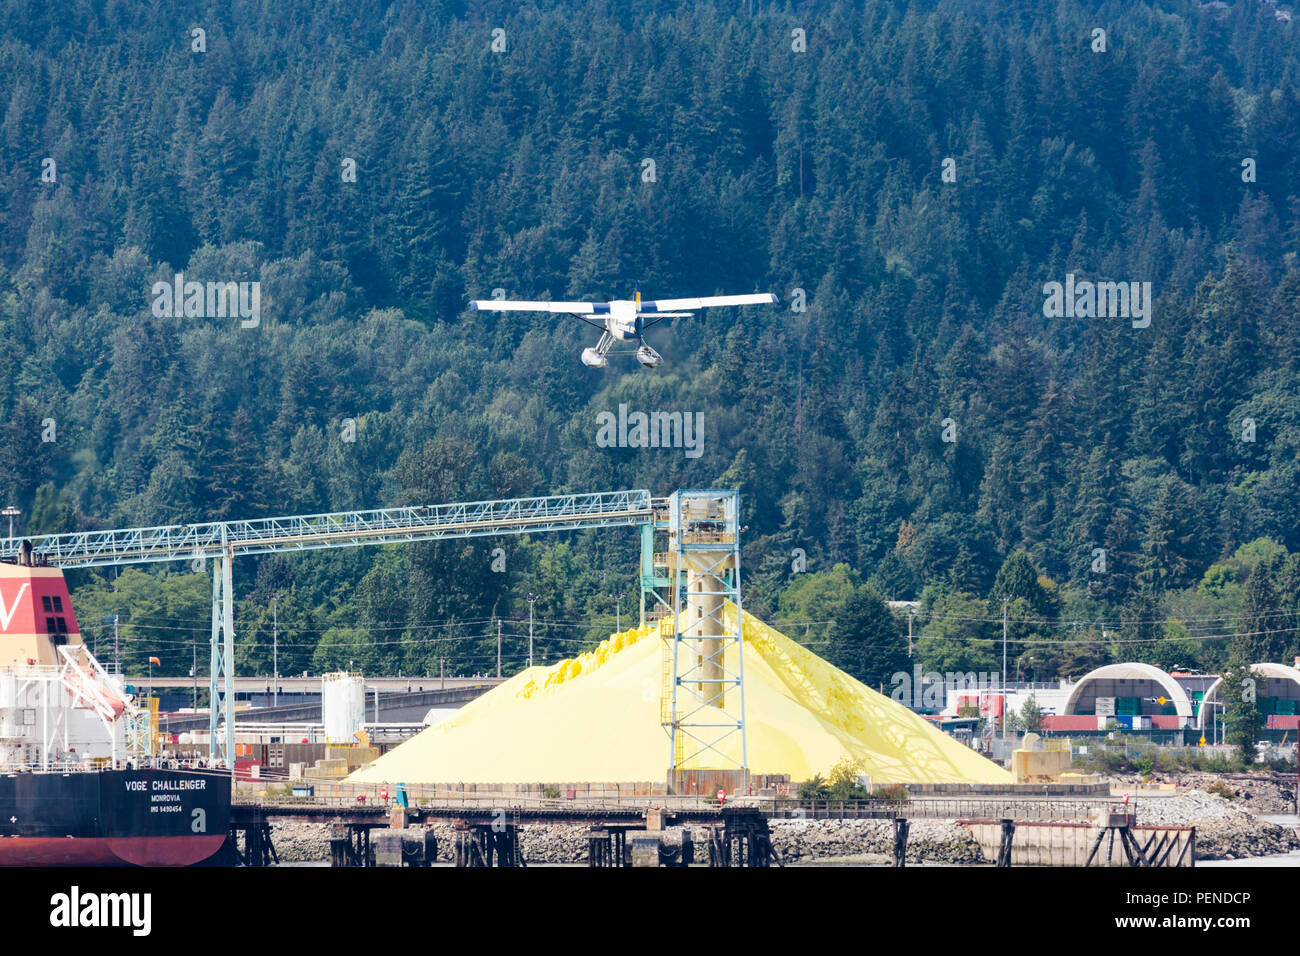 A tourist seaplane taking off in quite close proximity to the pile of sulphur in the harbour at North Vancouver, British Columbia, Canada Stock Photo